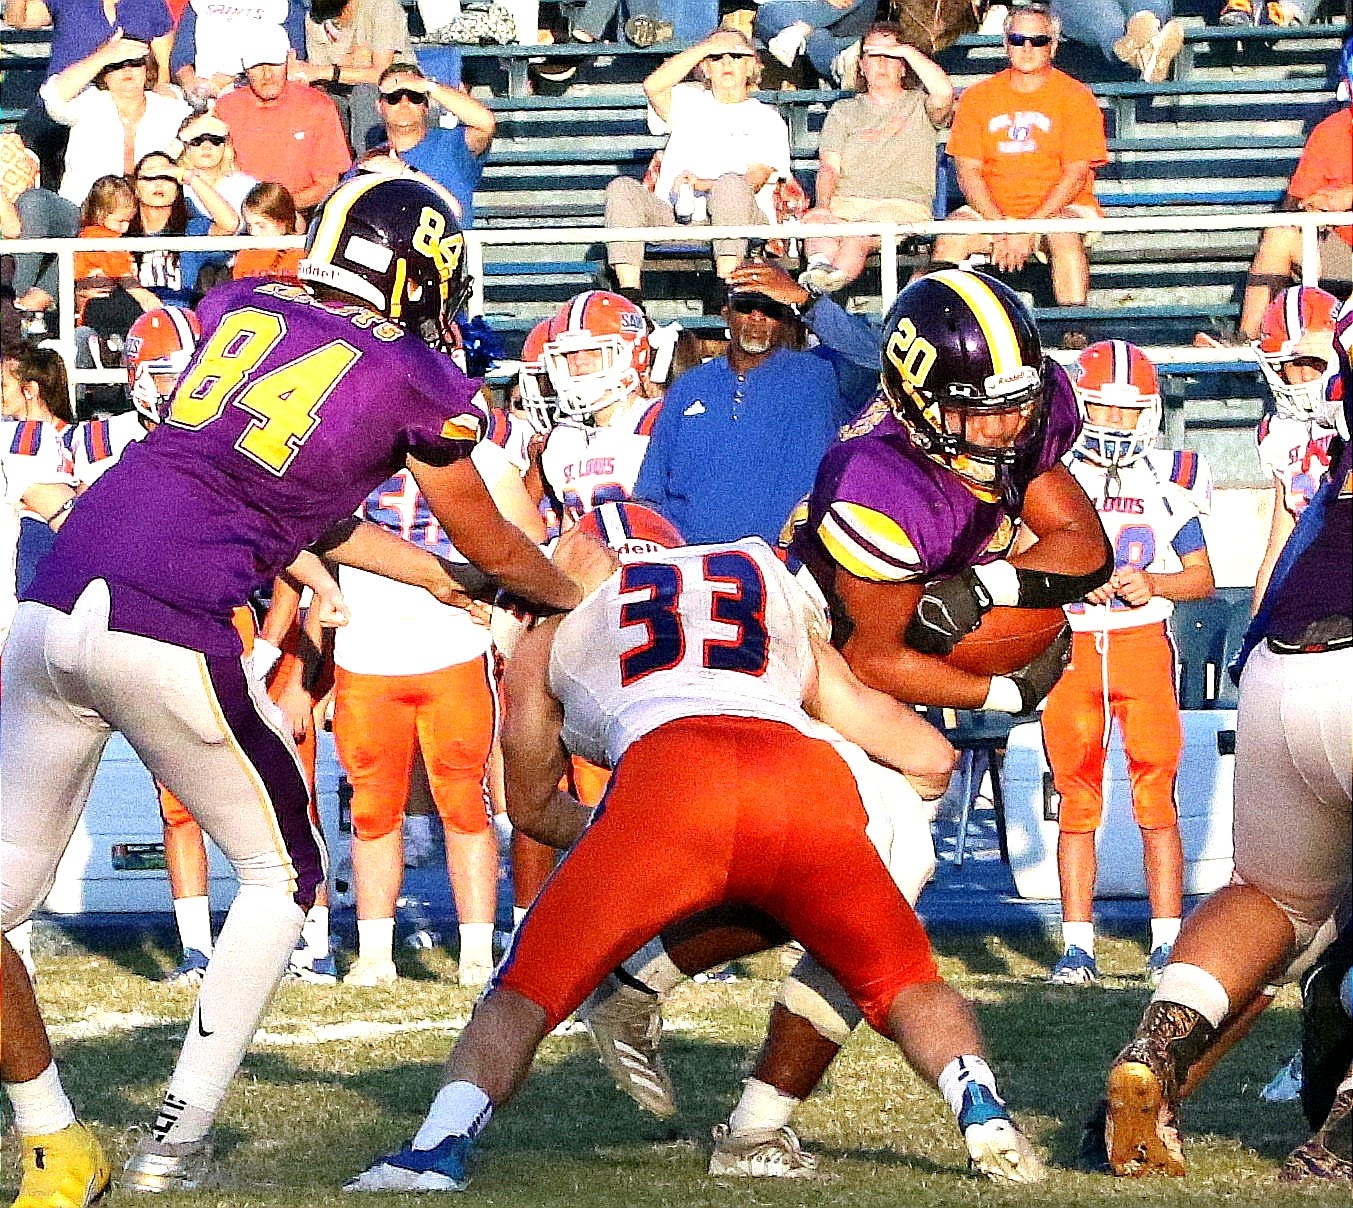 South Beauregard running back Malachi McElhaney (20) will need to have his best game of the season Friday as the Golden Knights face undefeated Jennings.